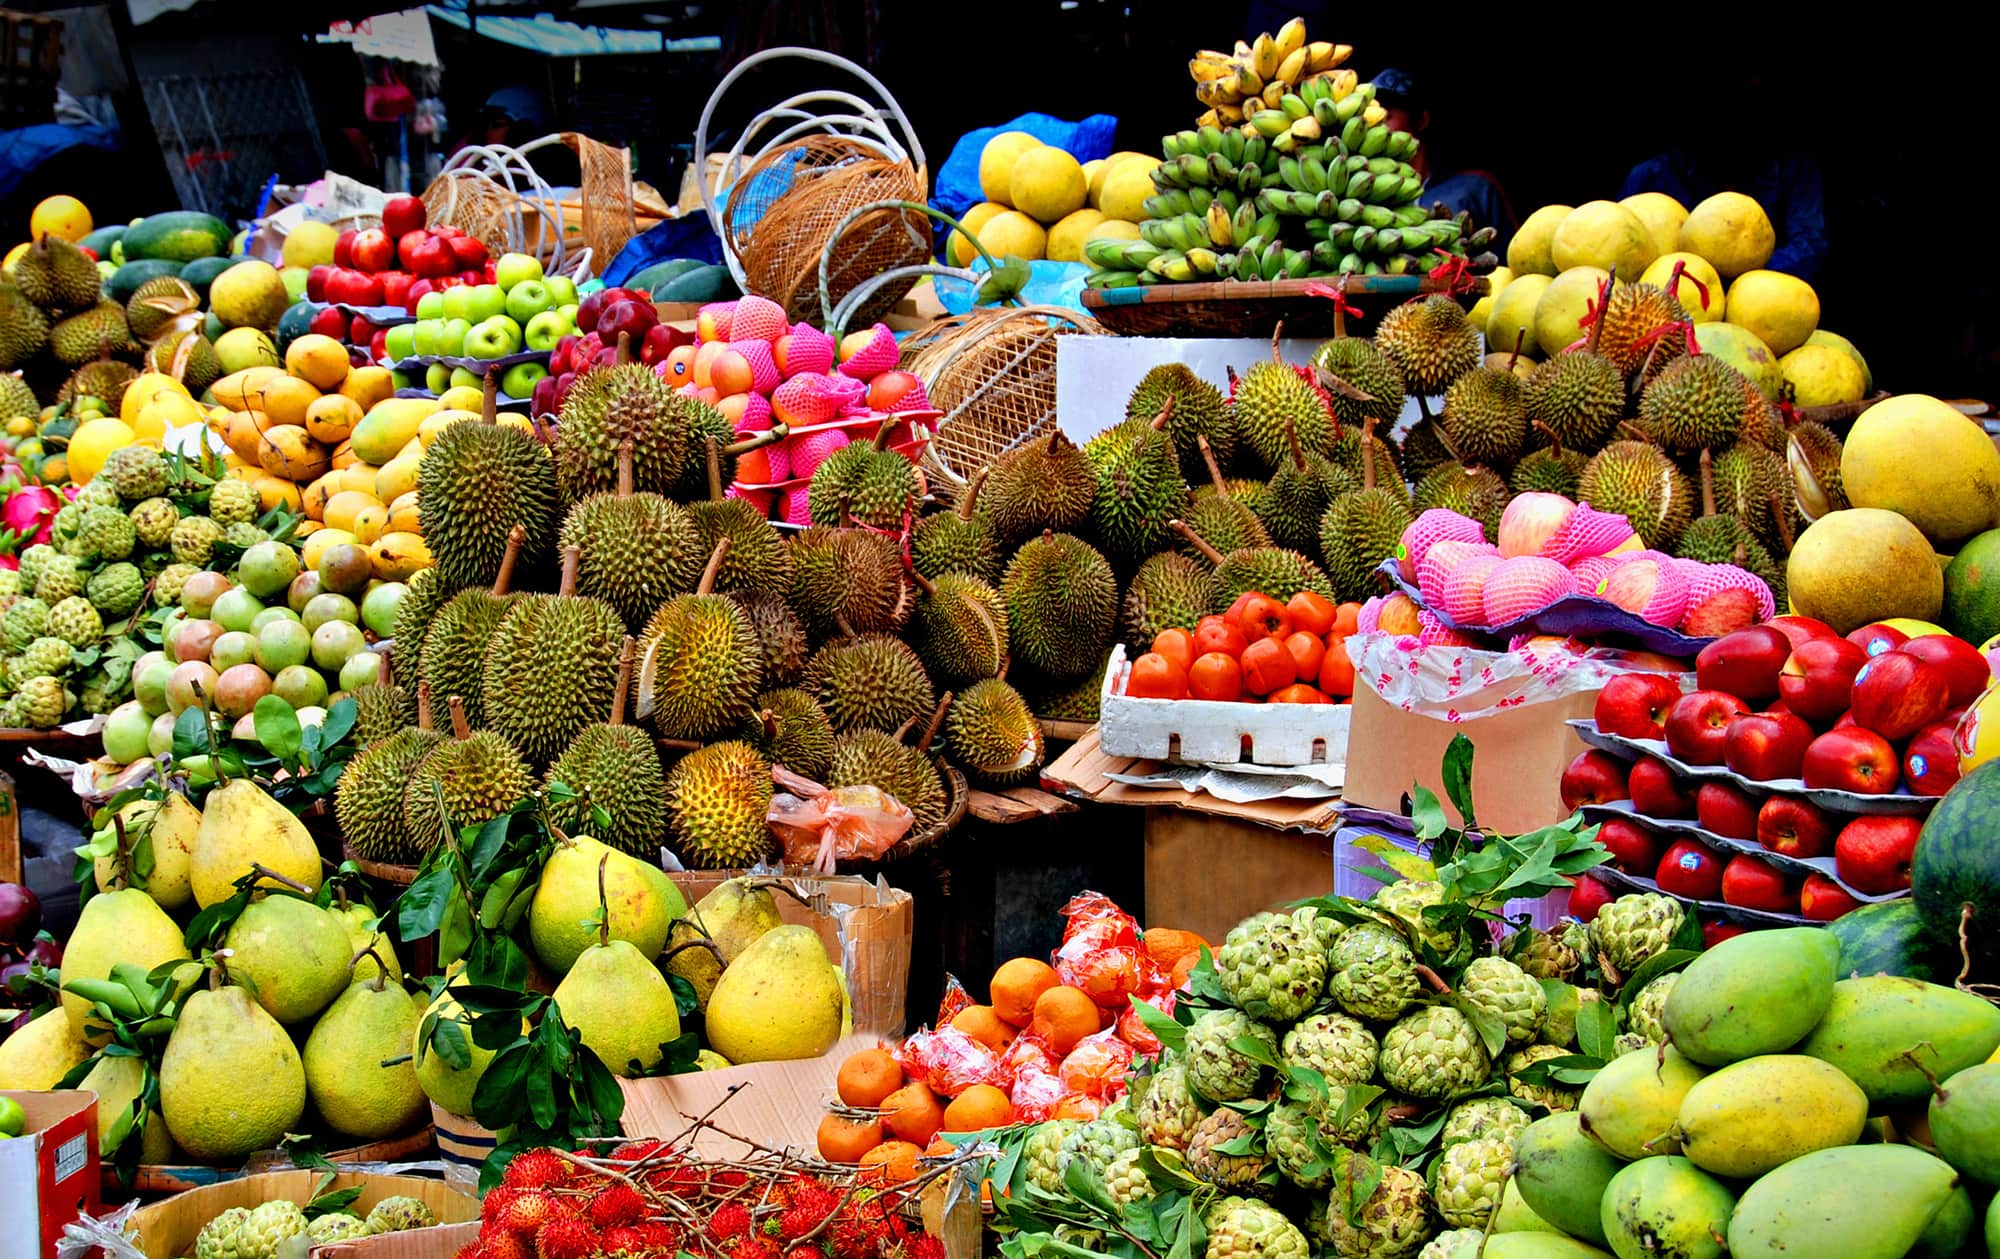 Durian is one of many delicious fruits and vegetables unique to Southeast Asia